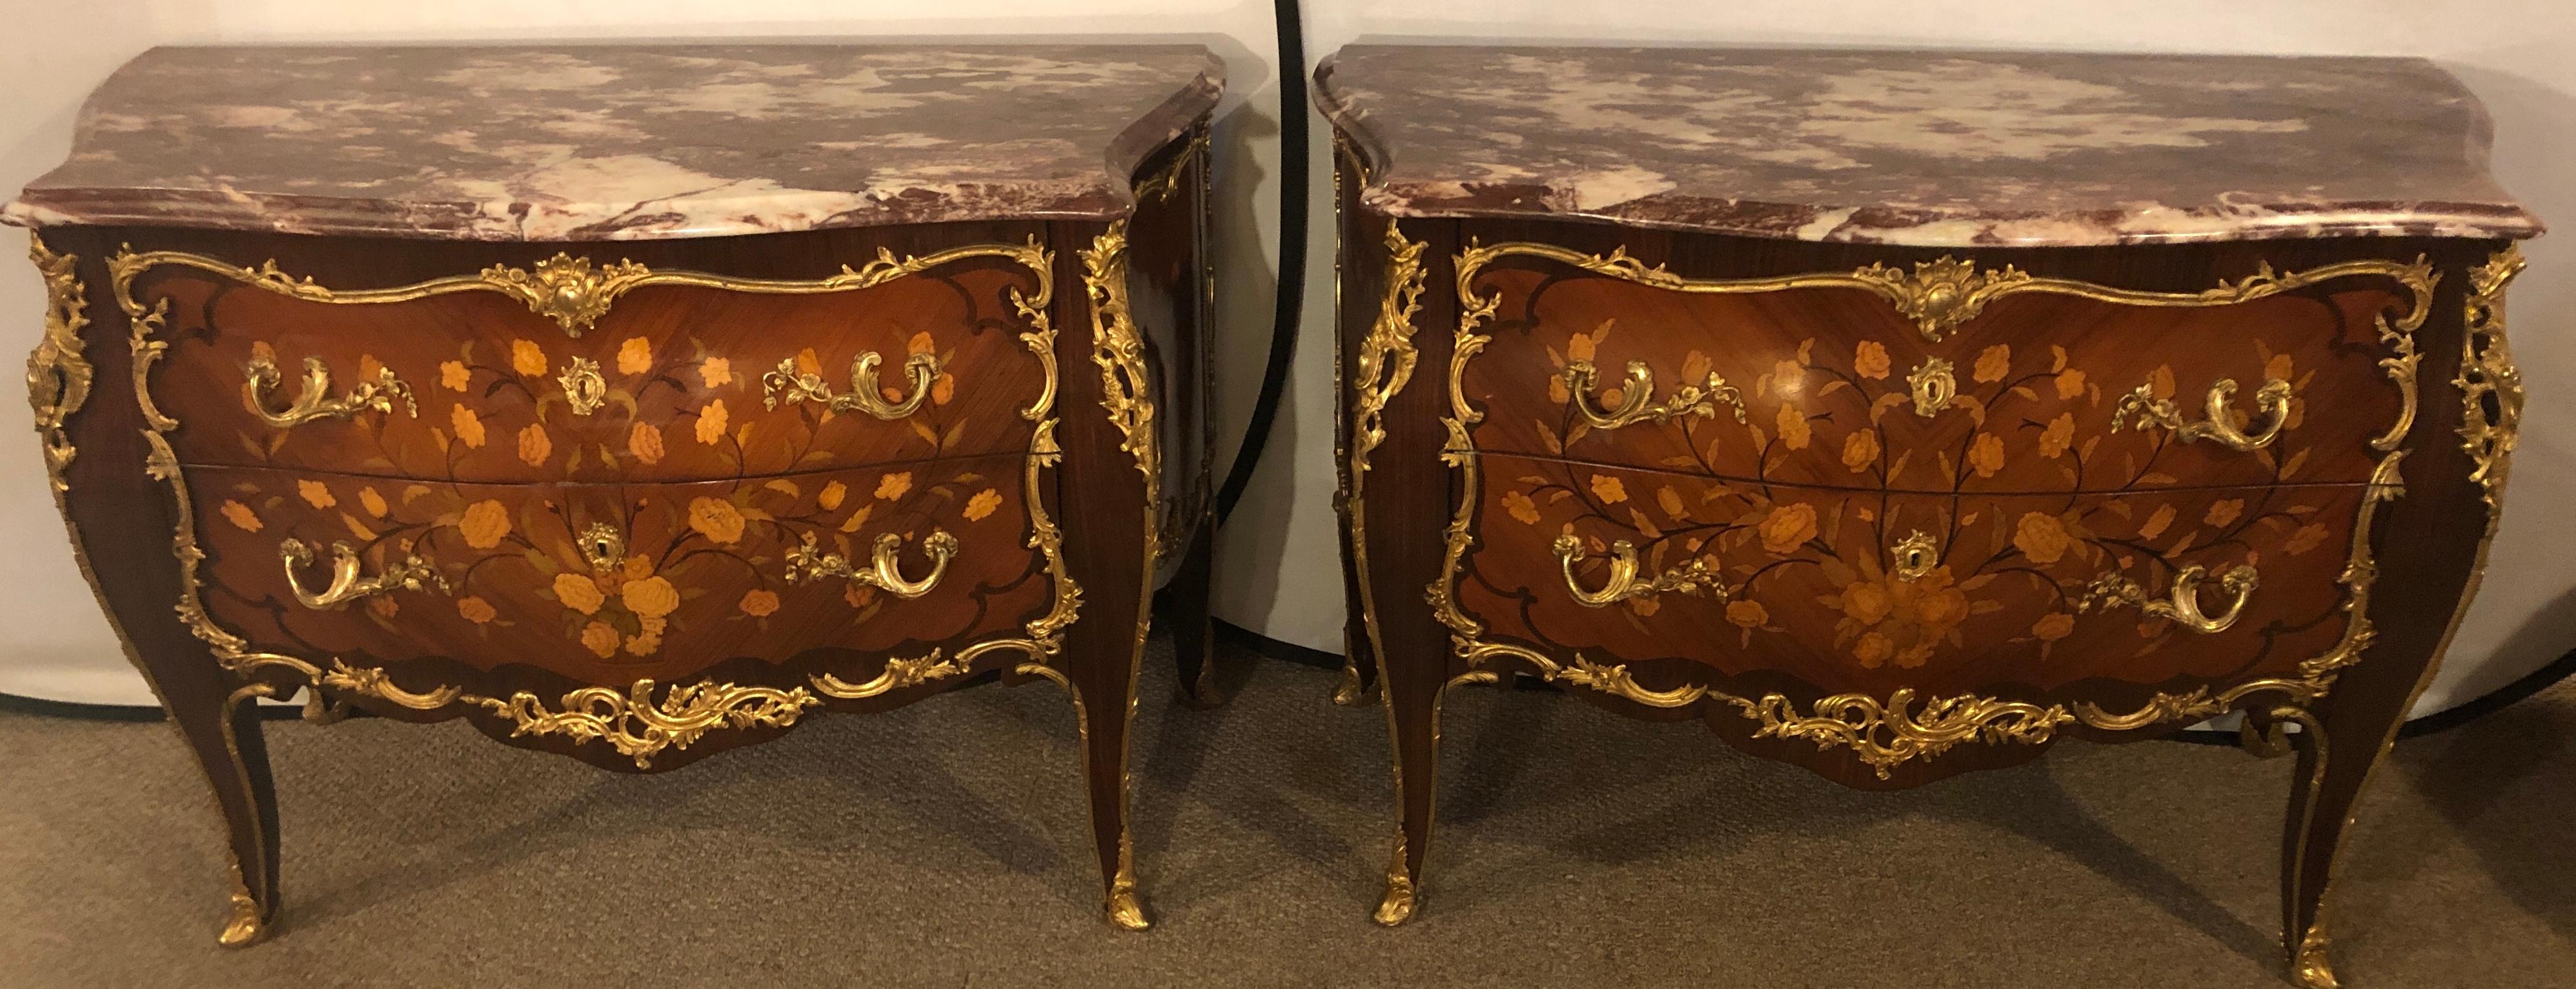 Pair of marble-top bronze mounted bombe floral inlaid Louis XV style commodes. Each of these spectacular custom quality commodes have full bronze shoes leading to a myriad of bronze trim work and floral inlays of kings-wood and satinwood design. The